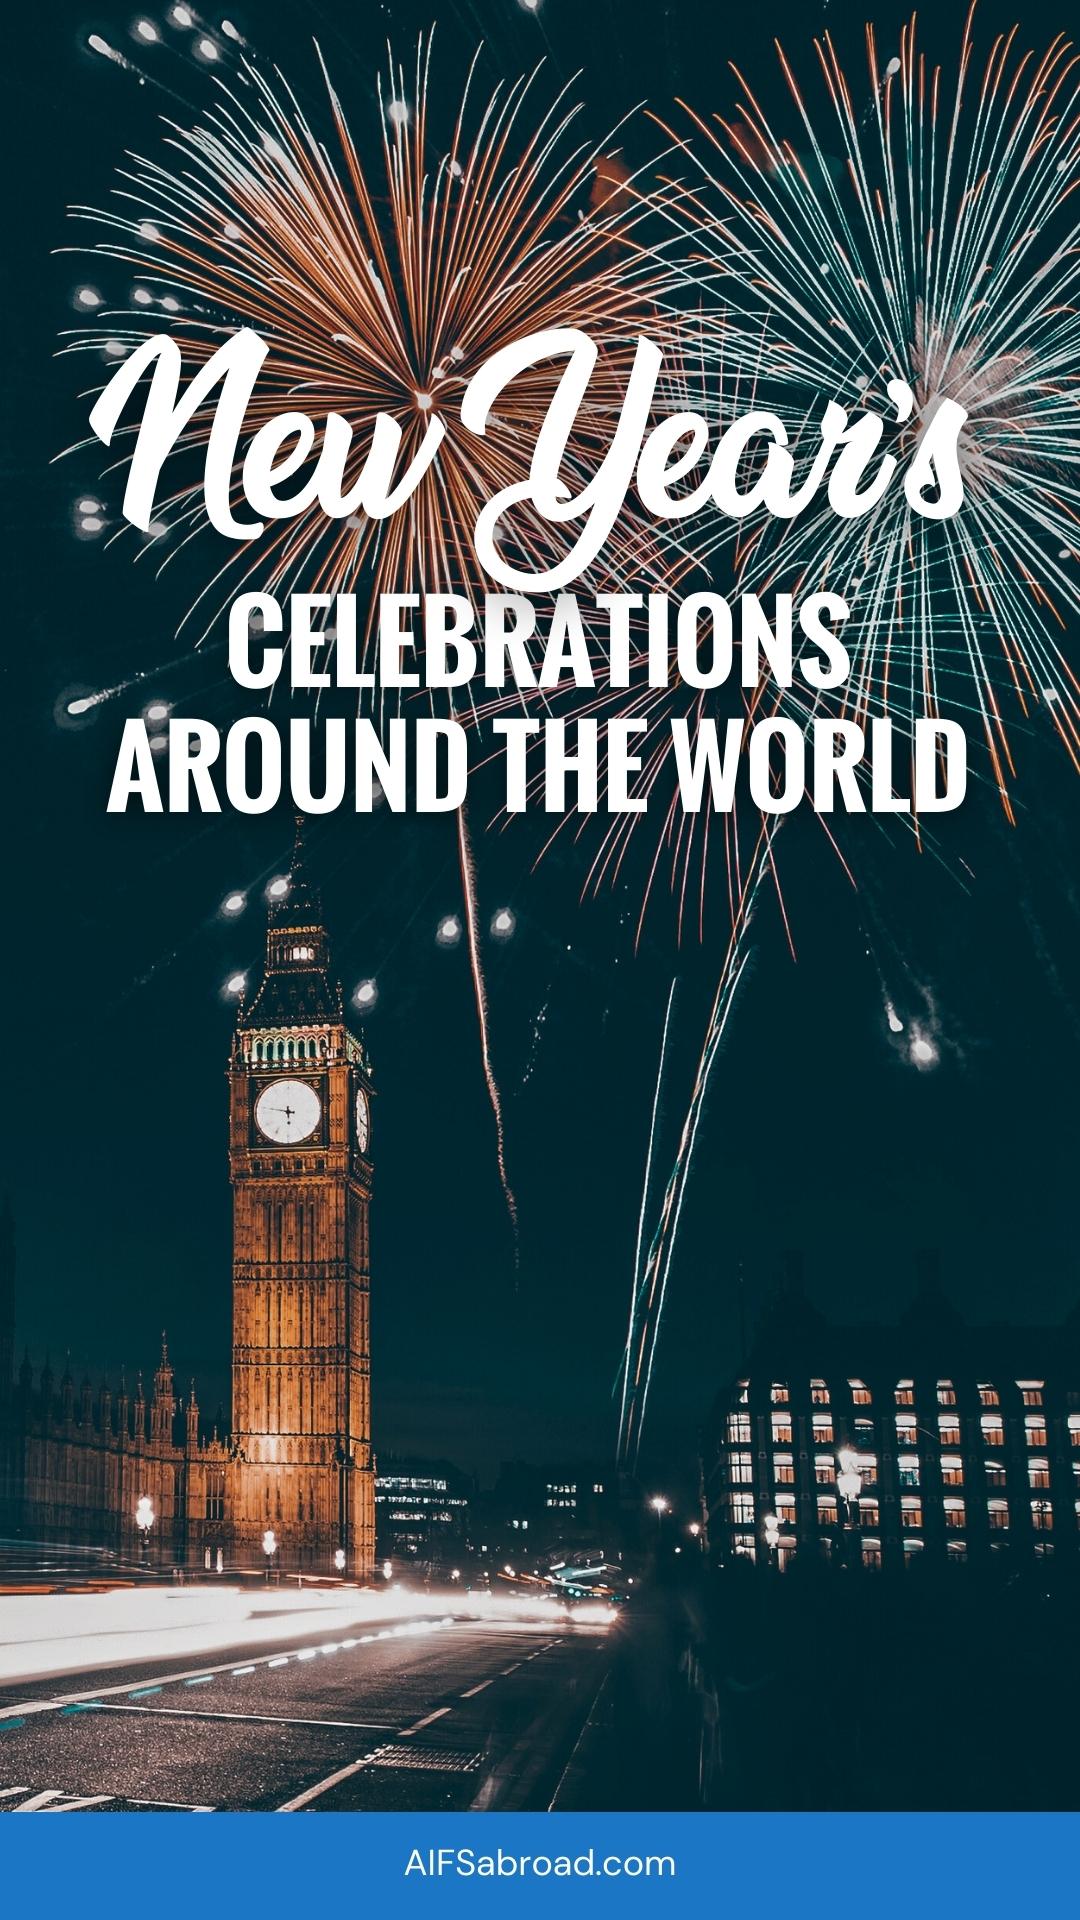 London, England with Fireworks and text saying "New Year's Celebrations Around the World" - AIFS Abroad - Pin Image